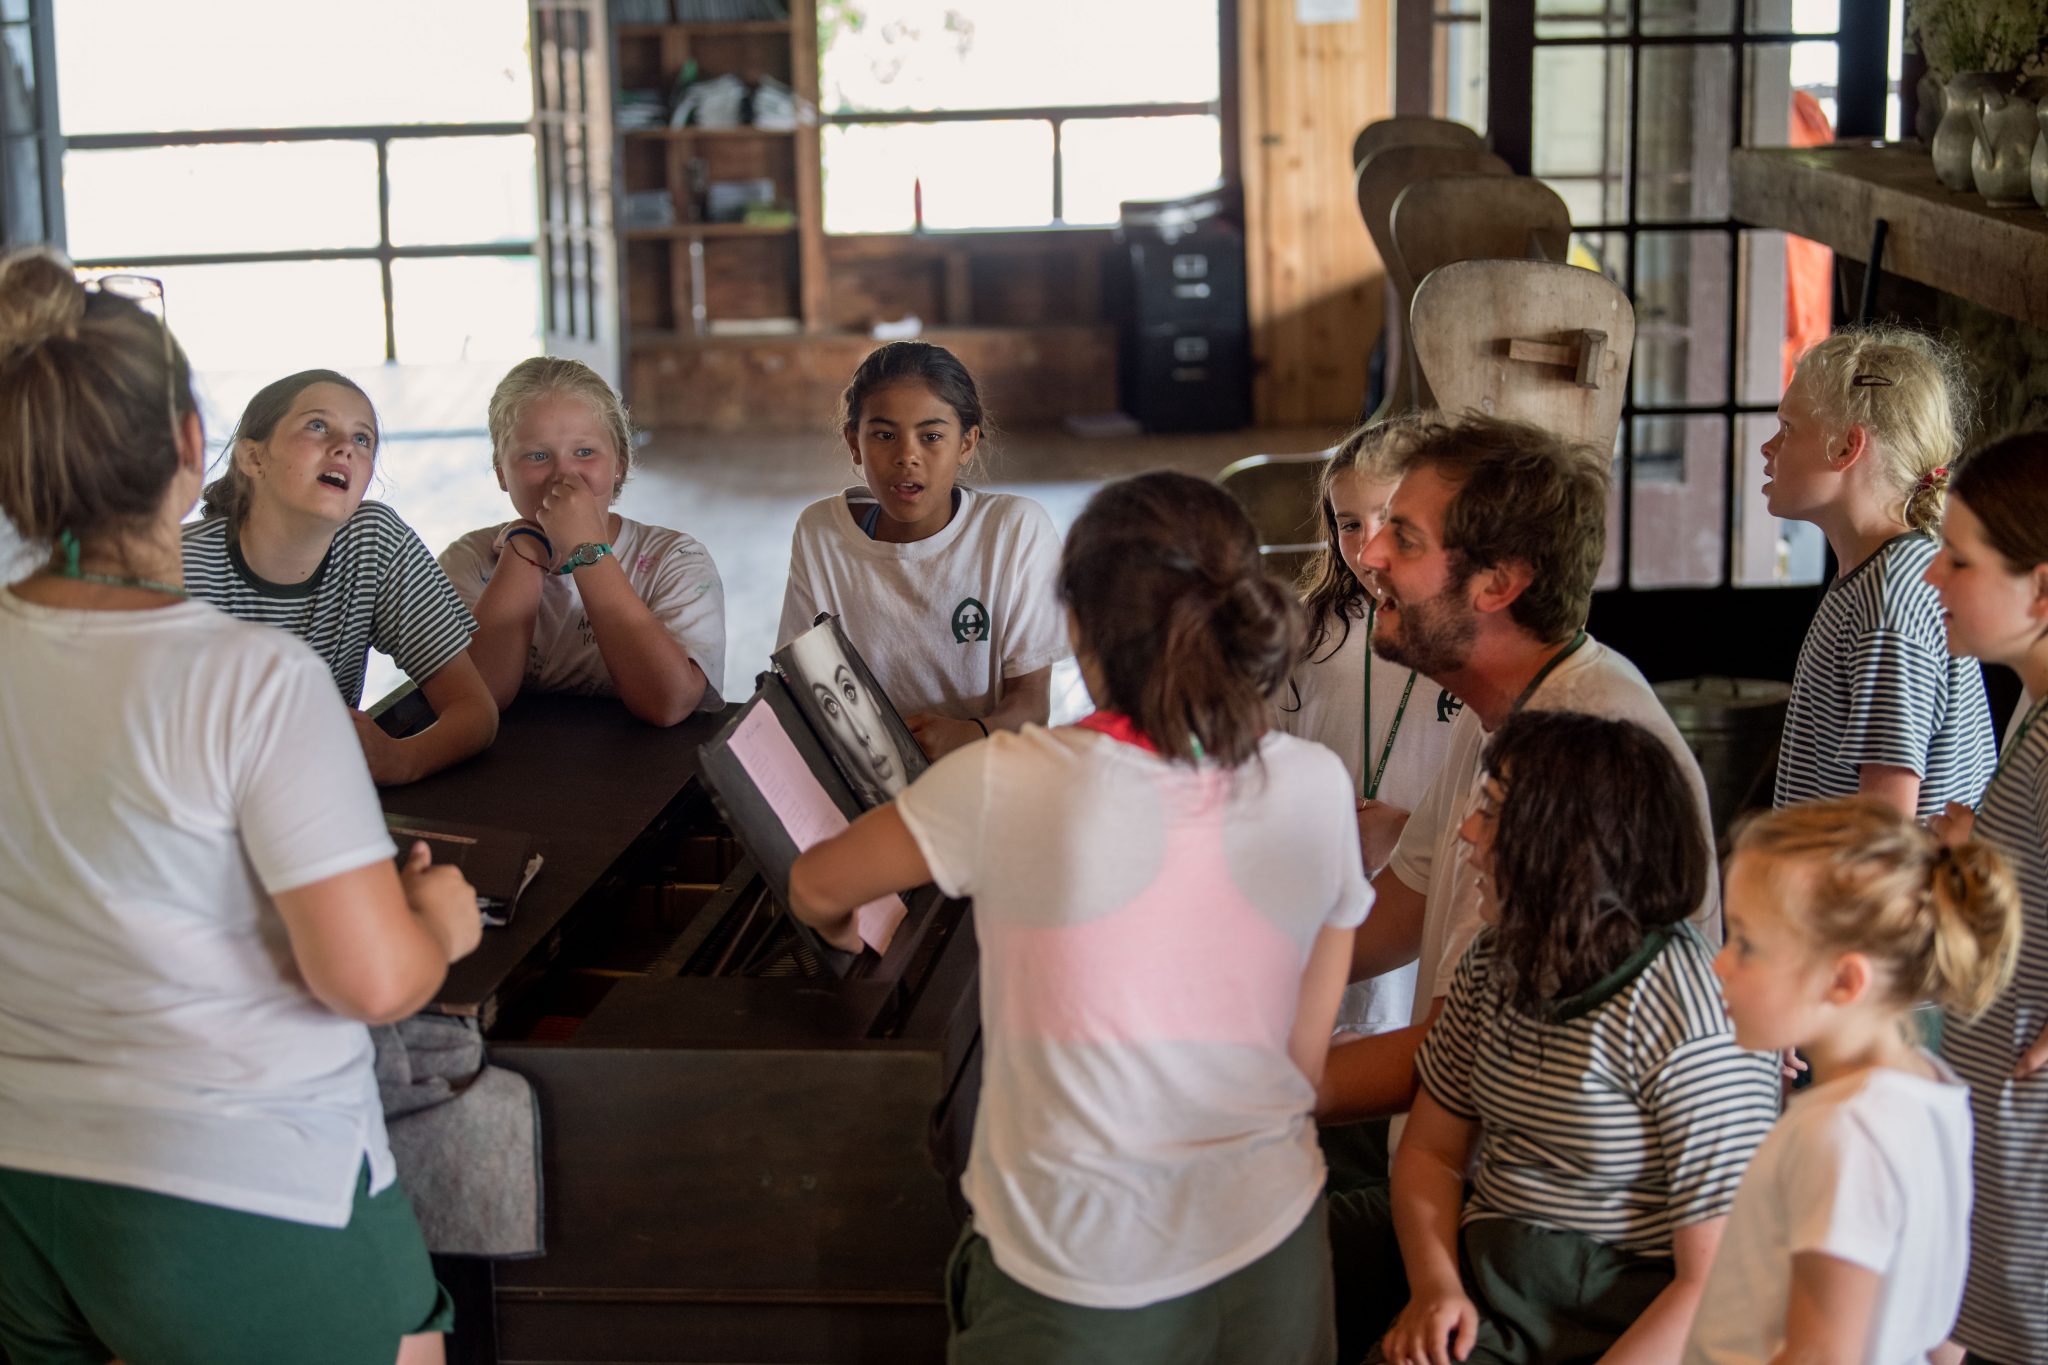 A group of Hivers singing around a counselor playing the piano.